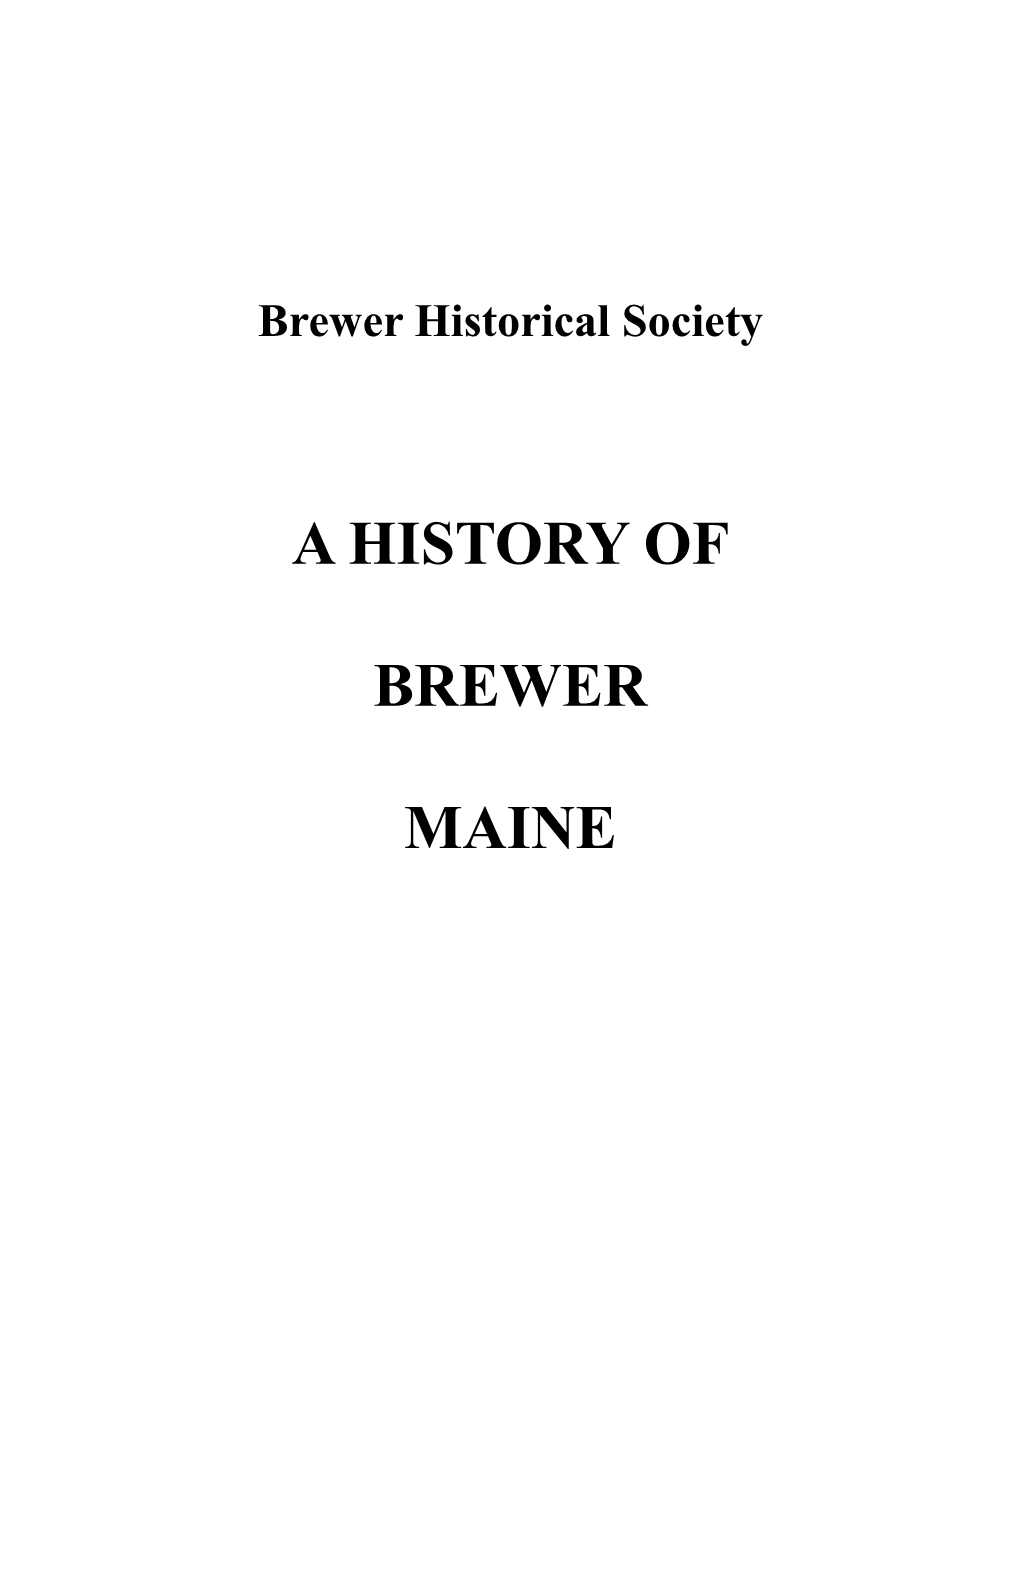 A History of Brewer Maine